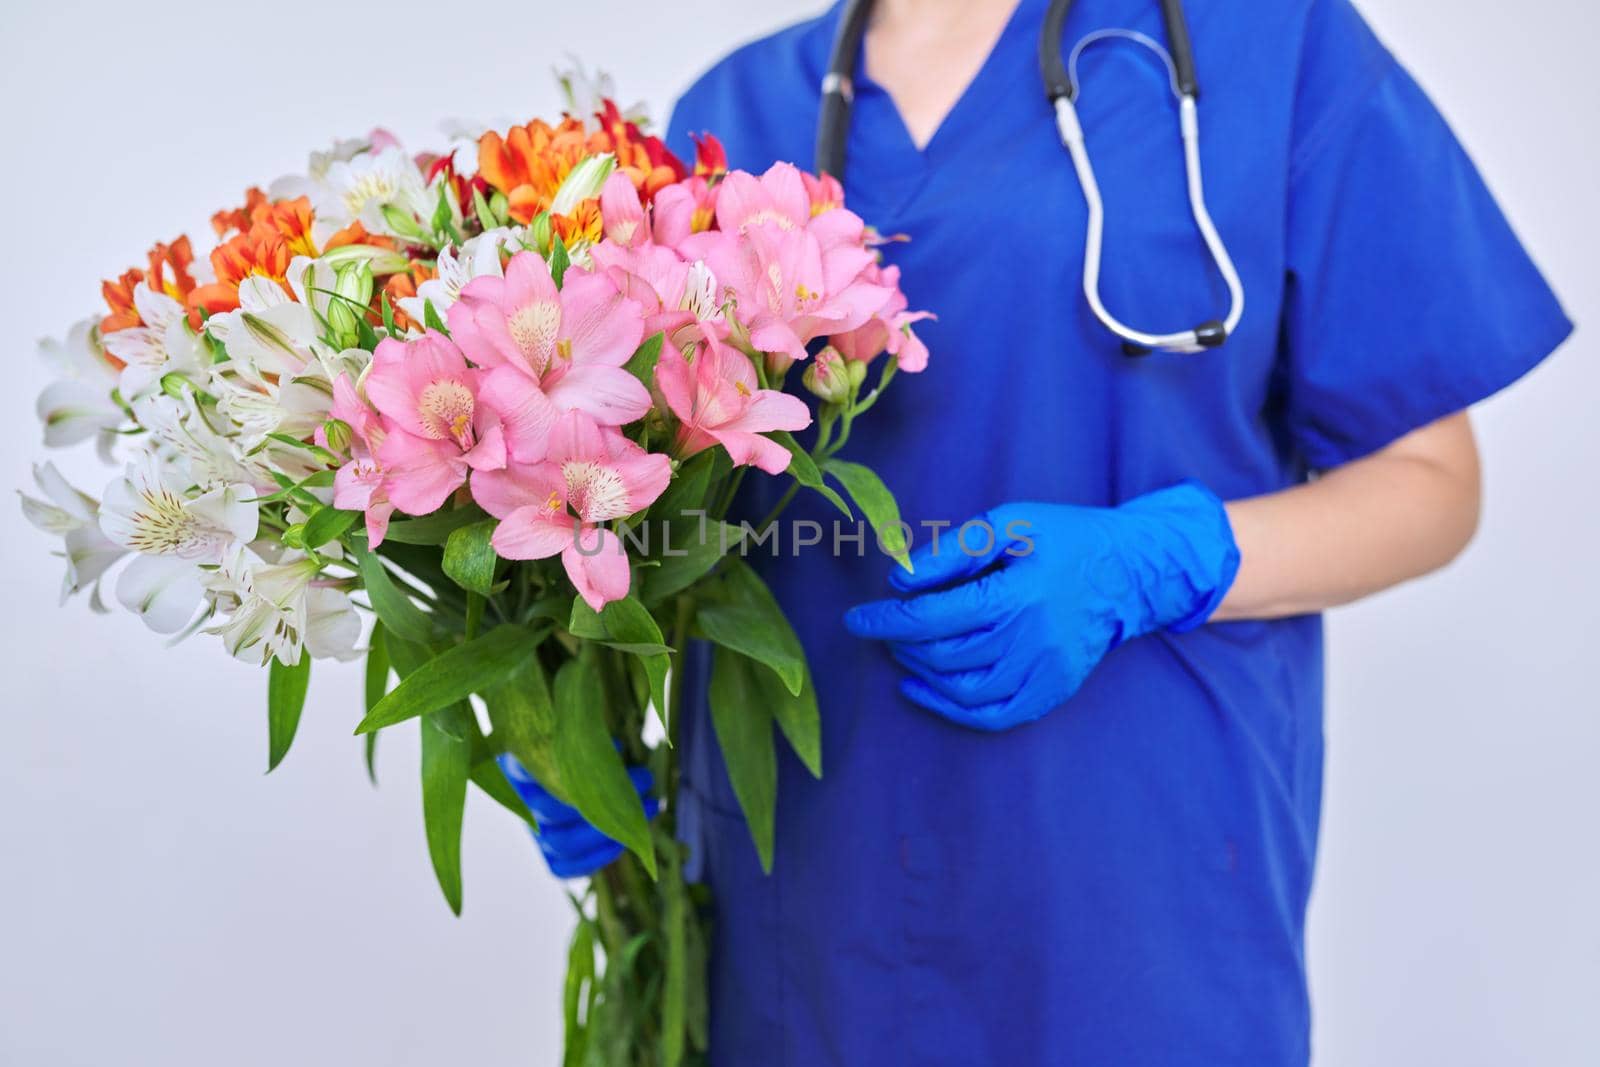 Health day, close-up bouquet of flowers in the hands of doctor nurse. Female medic in blue medical uniform, protective gloves with stethoscope on light background